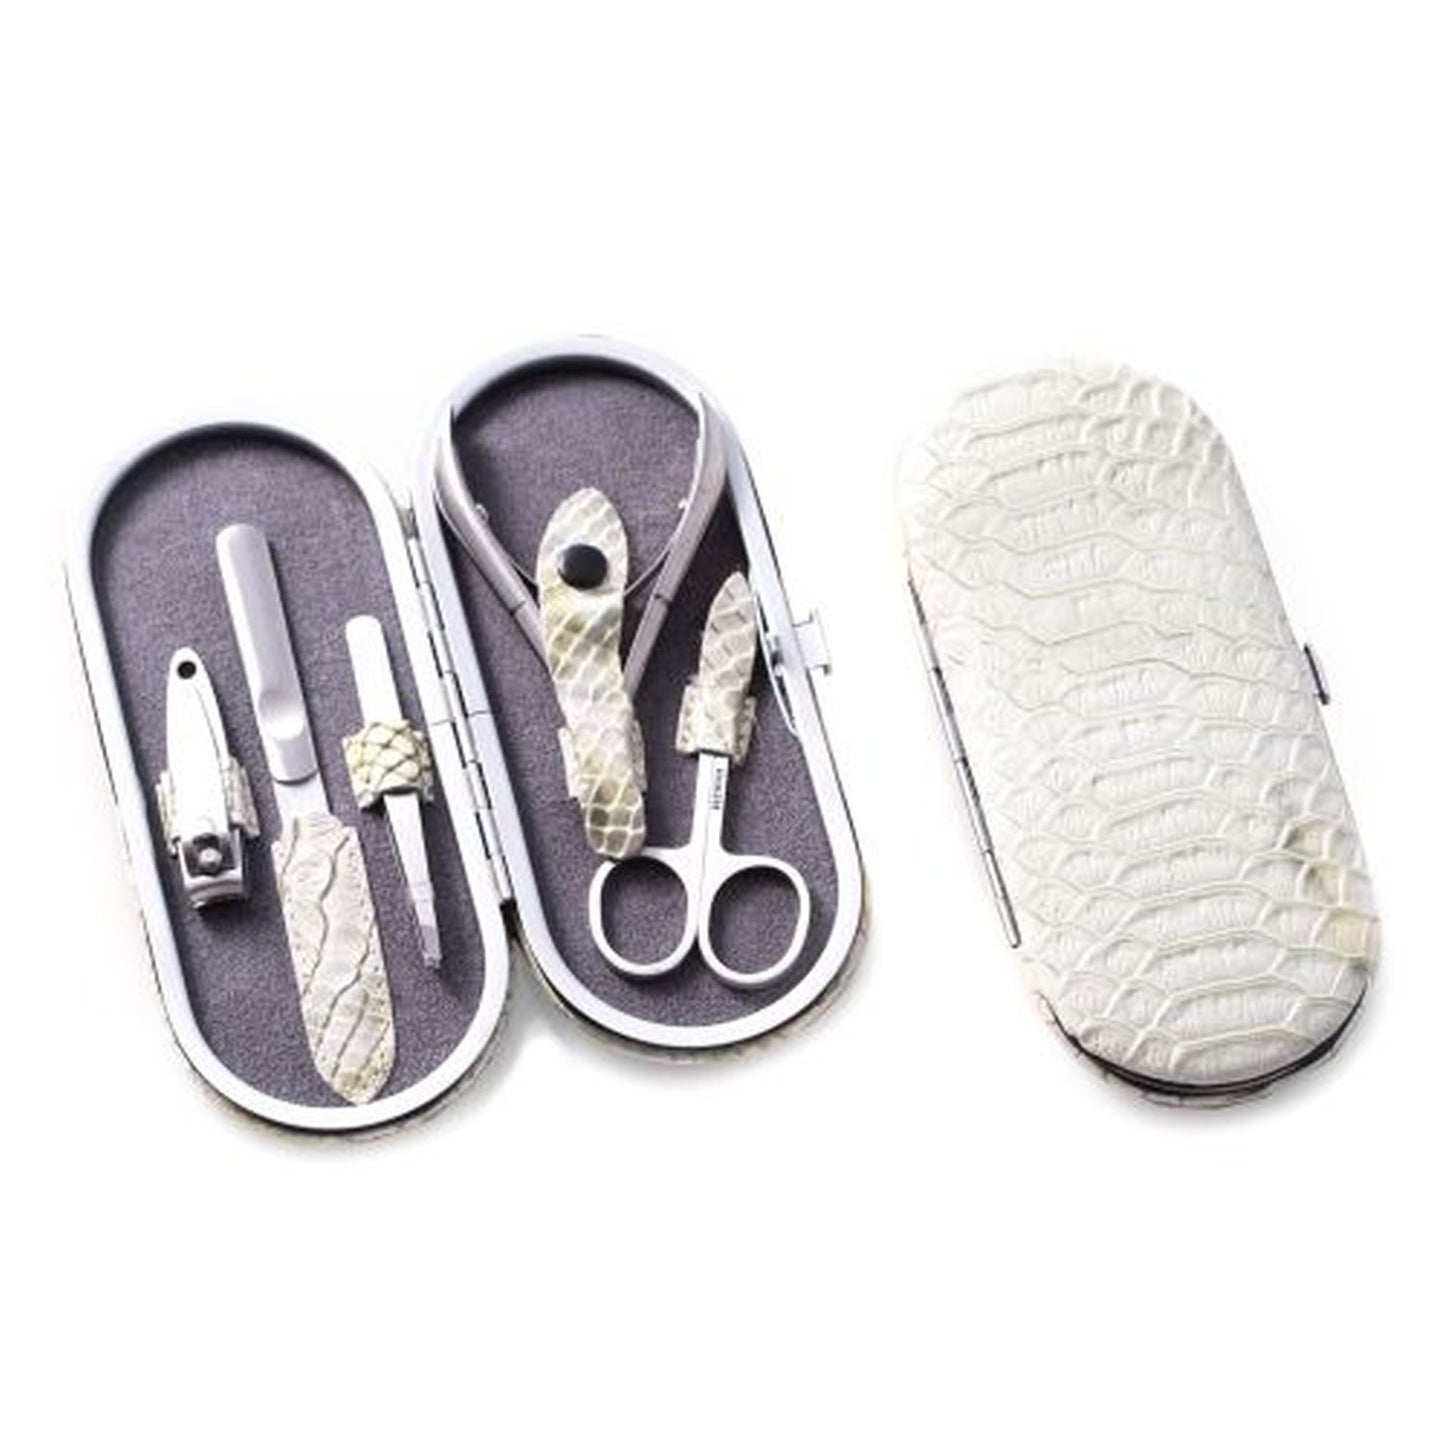 5 Piece Manicure Set In "White Snake" Pattern Leather Case